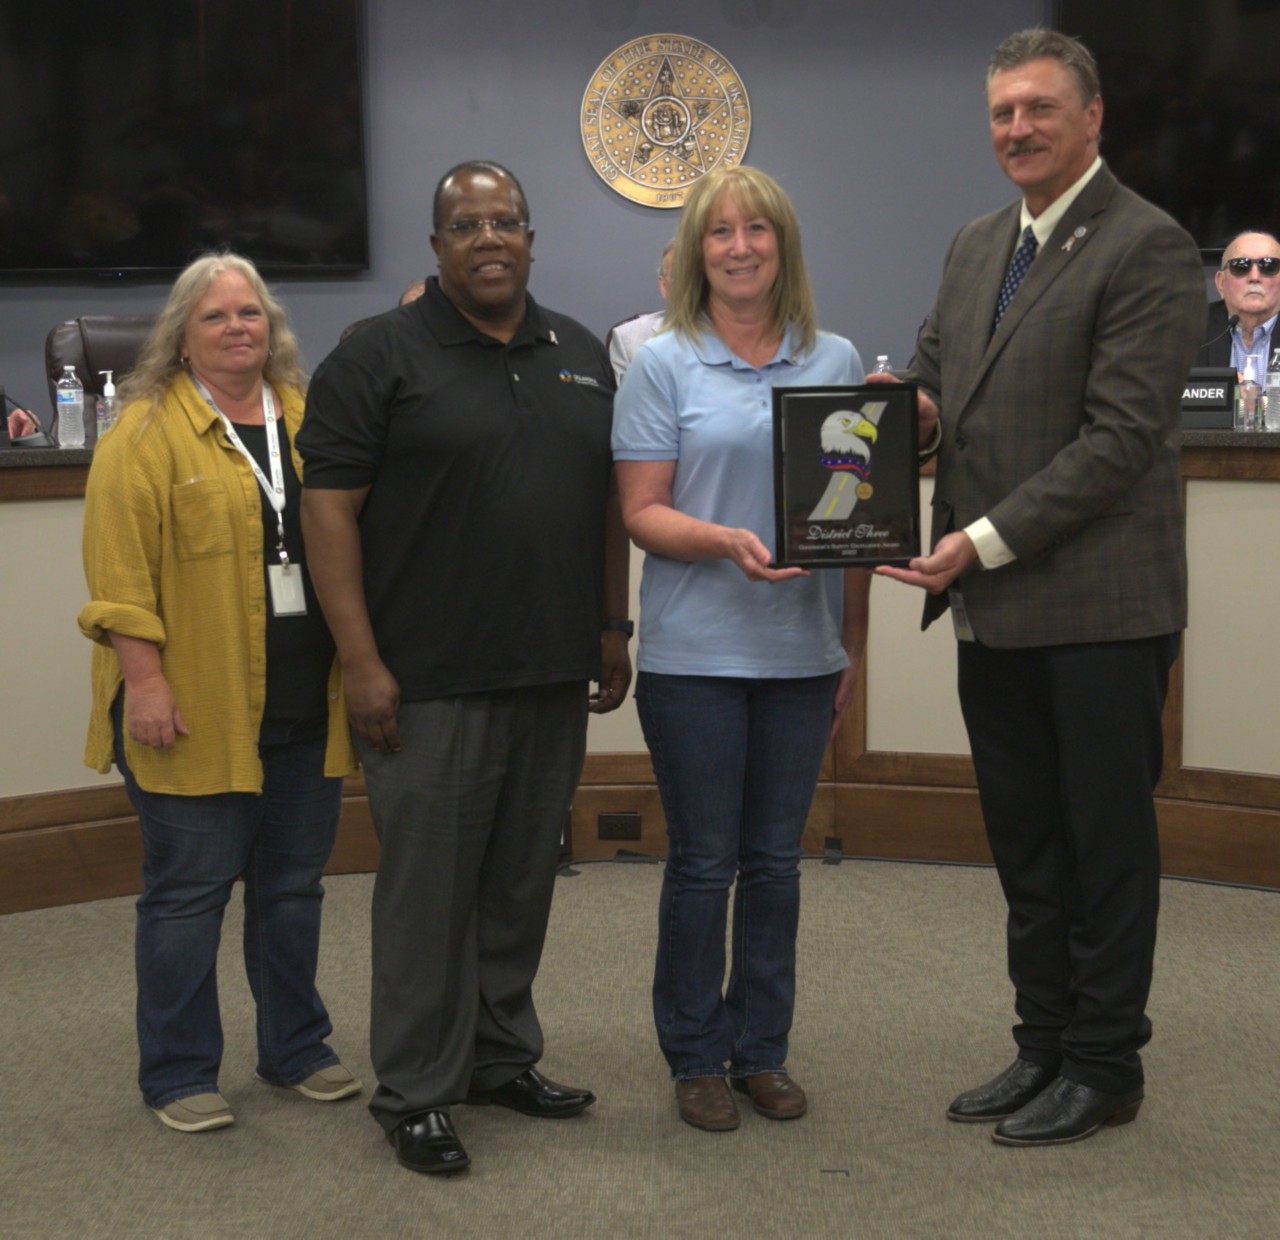 2022 Governor's Safety Excellence Award presented to Distrct 3 staff